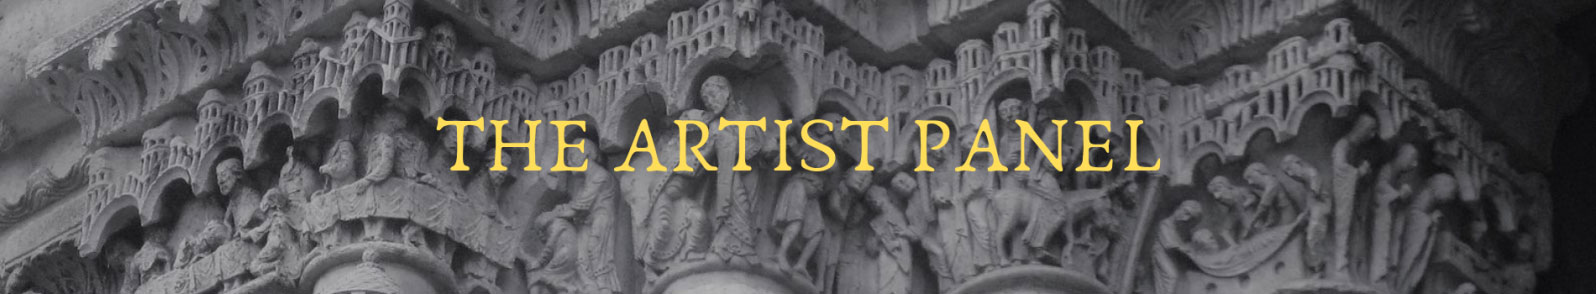 The-Artists-banner_web